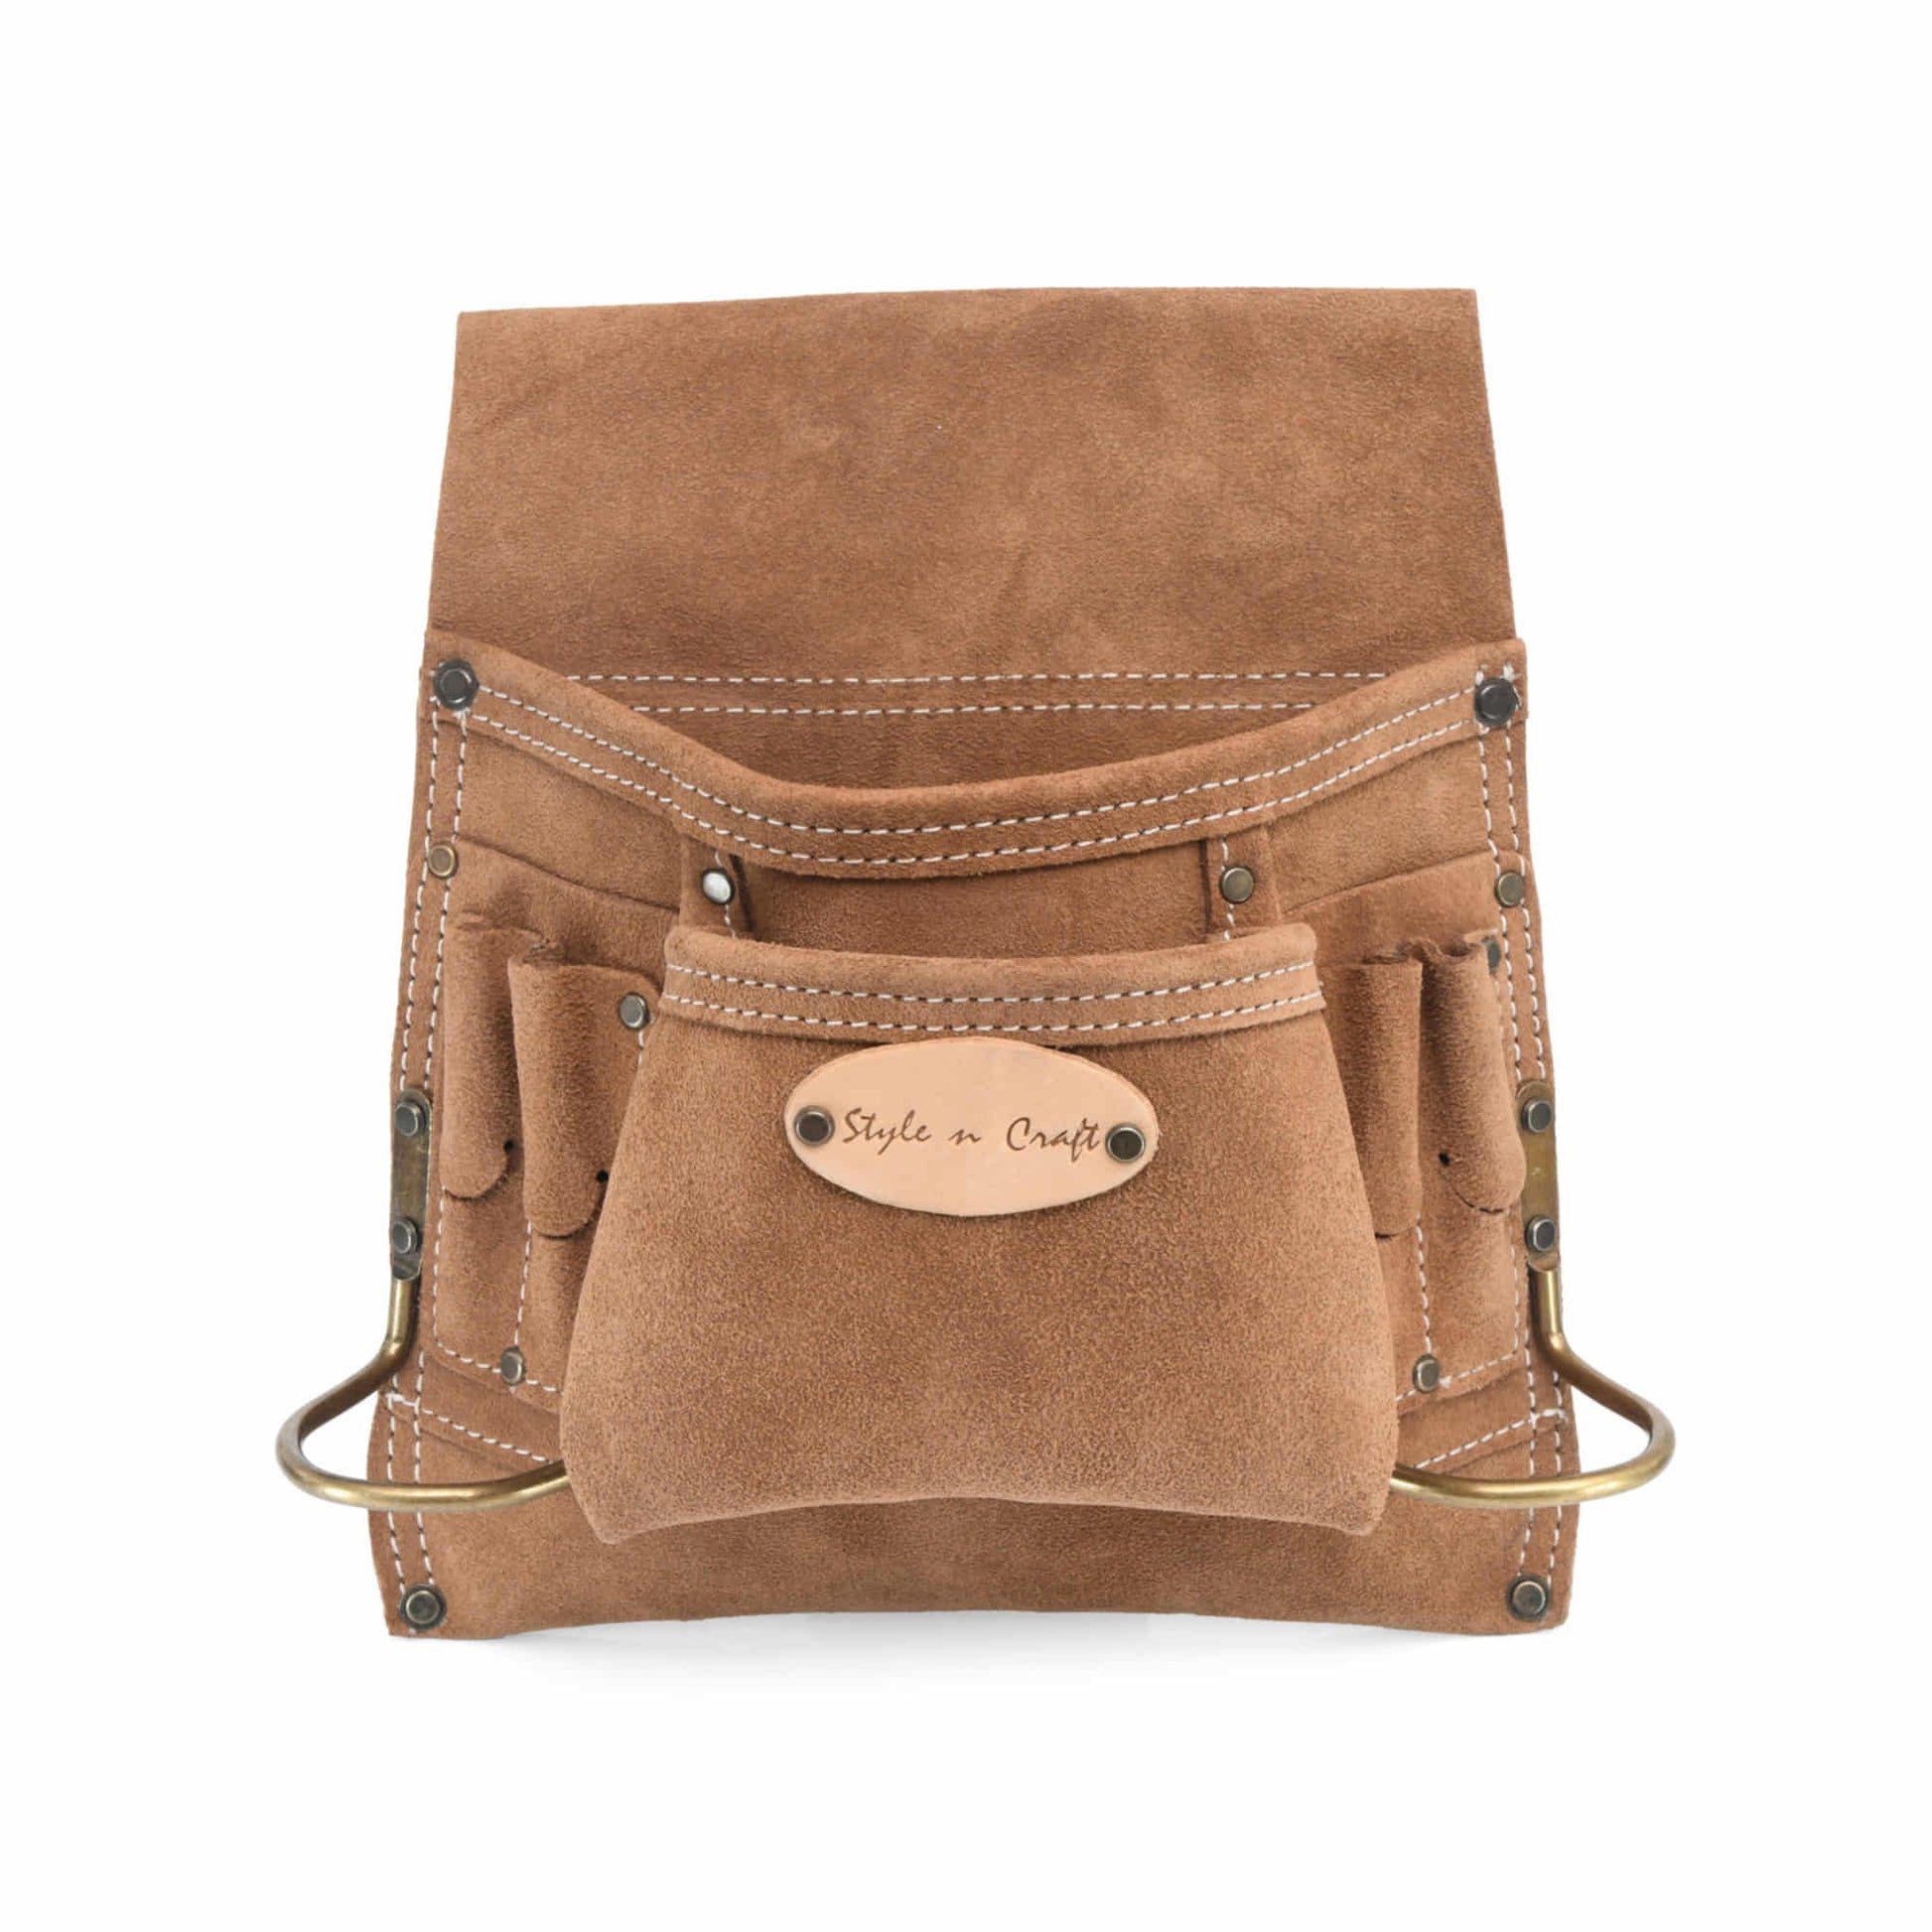 Style n Craft's 88823 - 8 Pocket Carpenter's Nail and Tool Pouch in Heavy Duty Suede Leather in Dark Tan Color - Front View